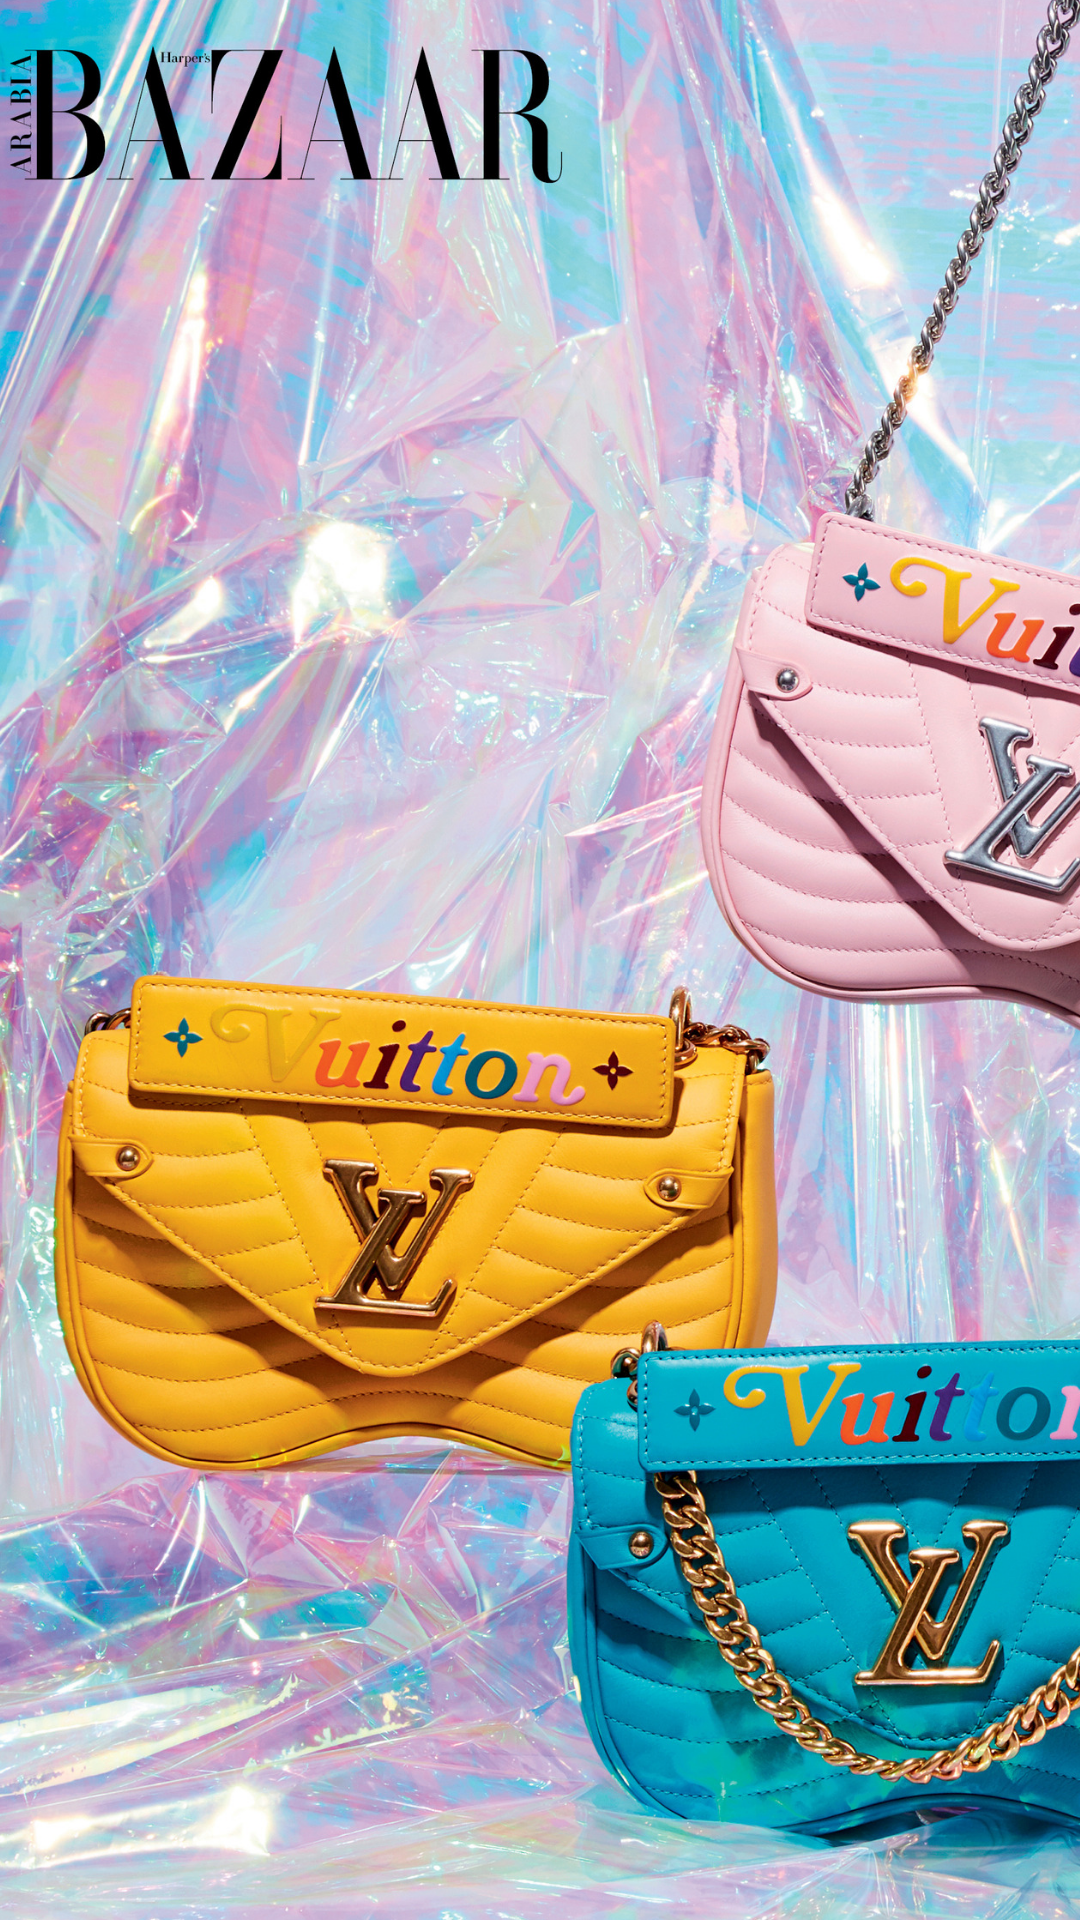 Suitable Sweets - Louis Vuitton prints for a queen @bodybutterbalm